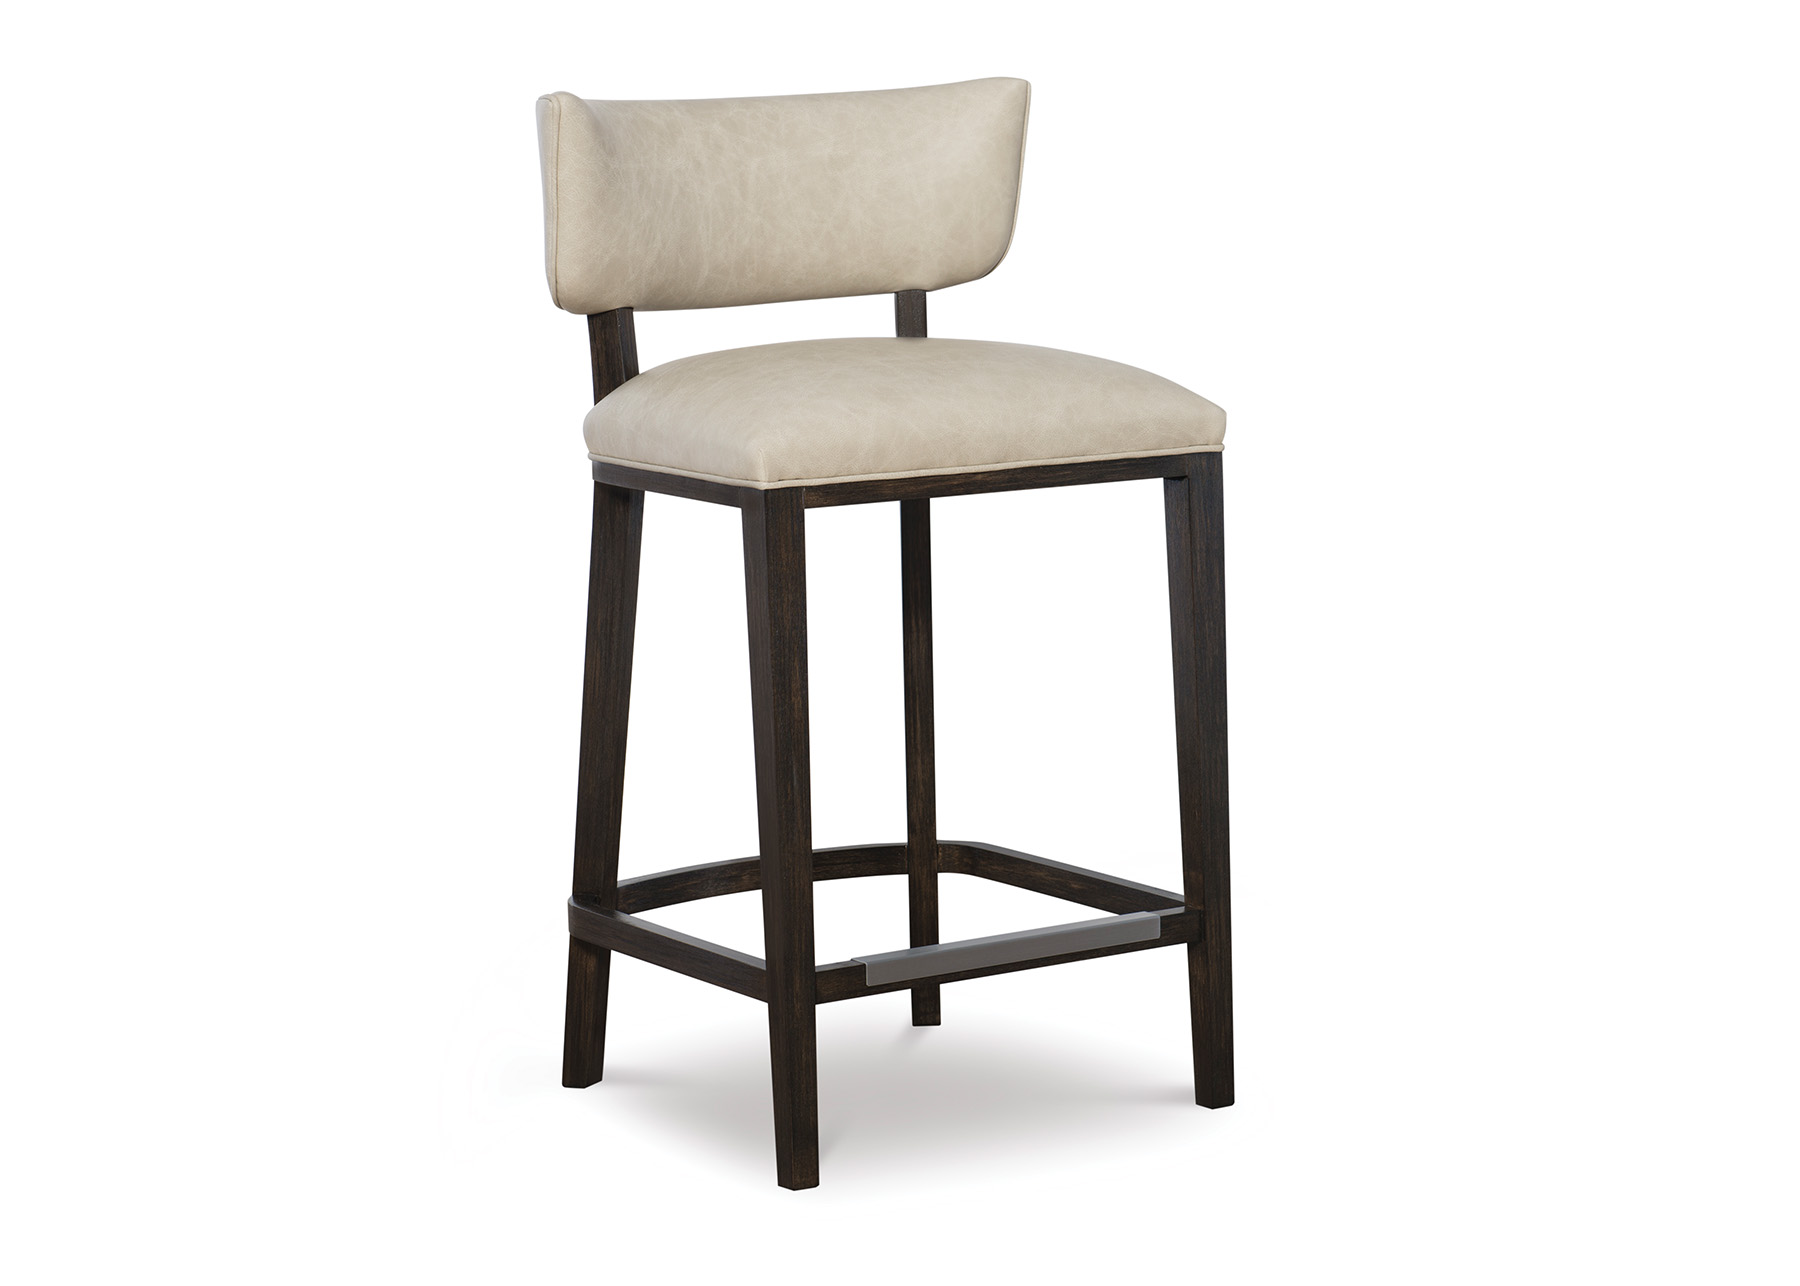  PIMMS COUNTER STOOL